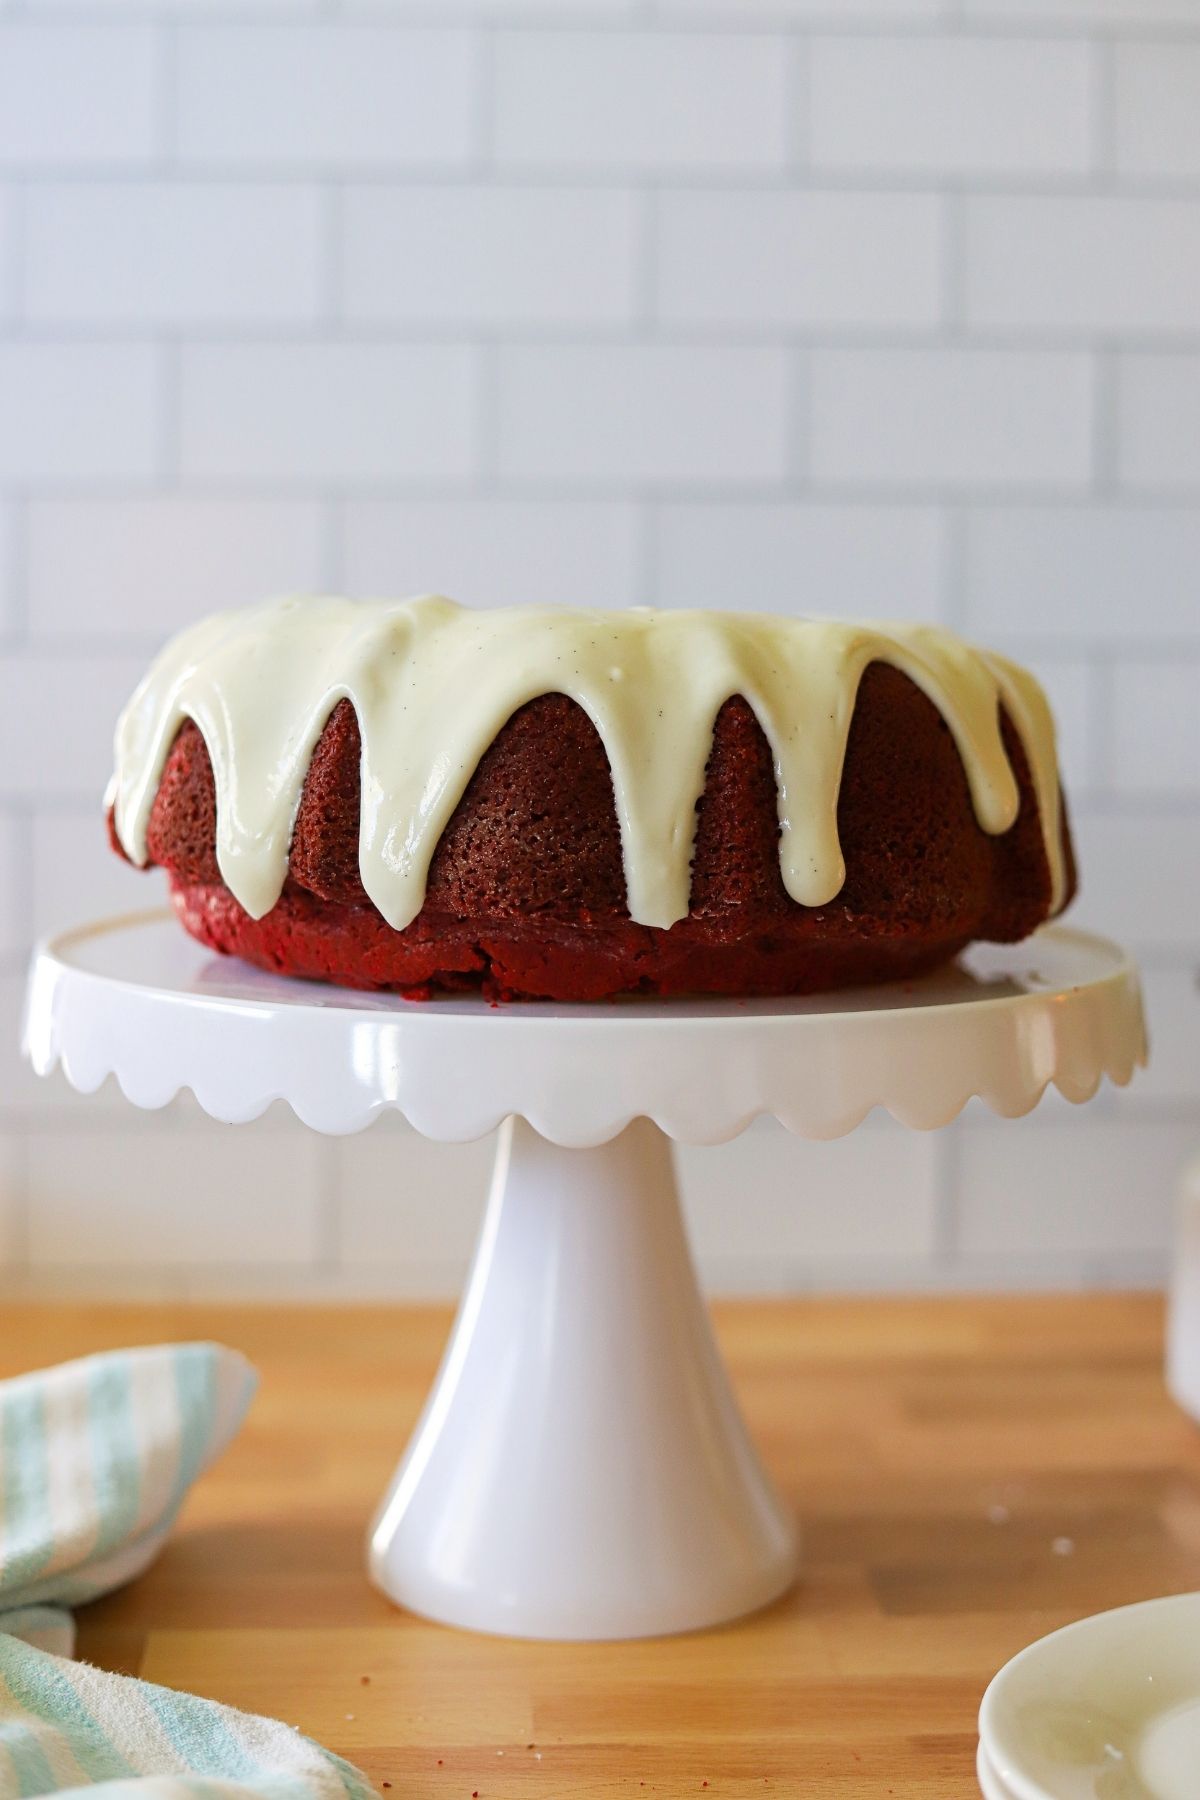 a red velvet cake baked in a bundt pan, topped with cream cheese glaze on a white cake stand